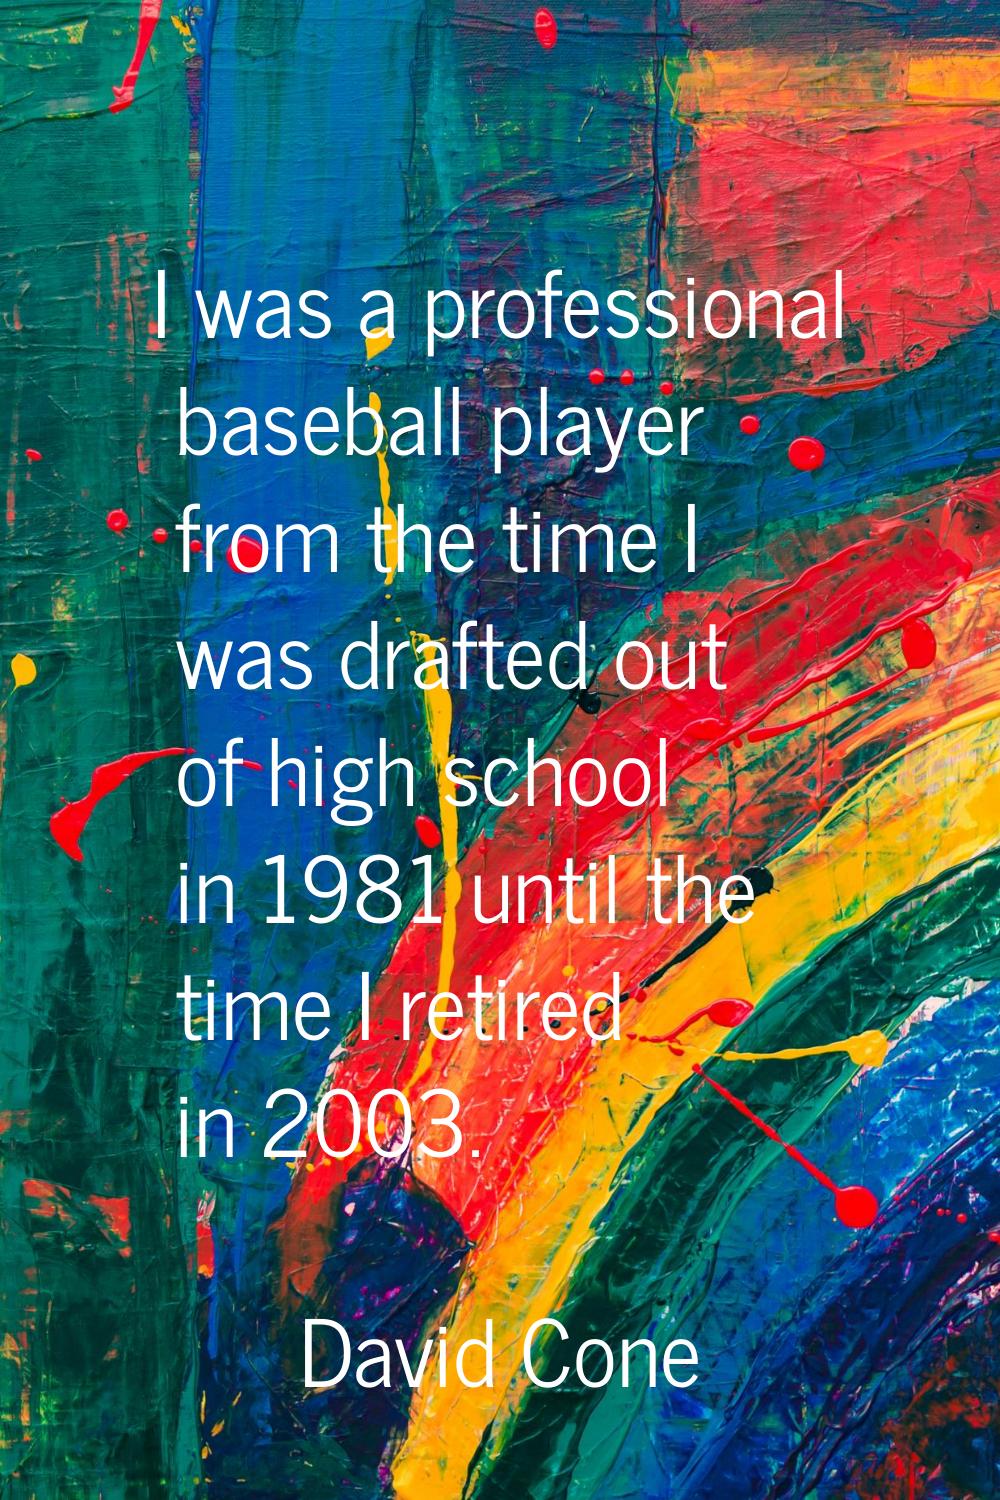 I was a professional baseball player from the time I was drafted out of high school in 1981 until t